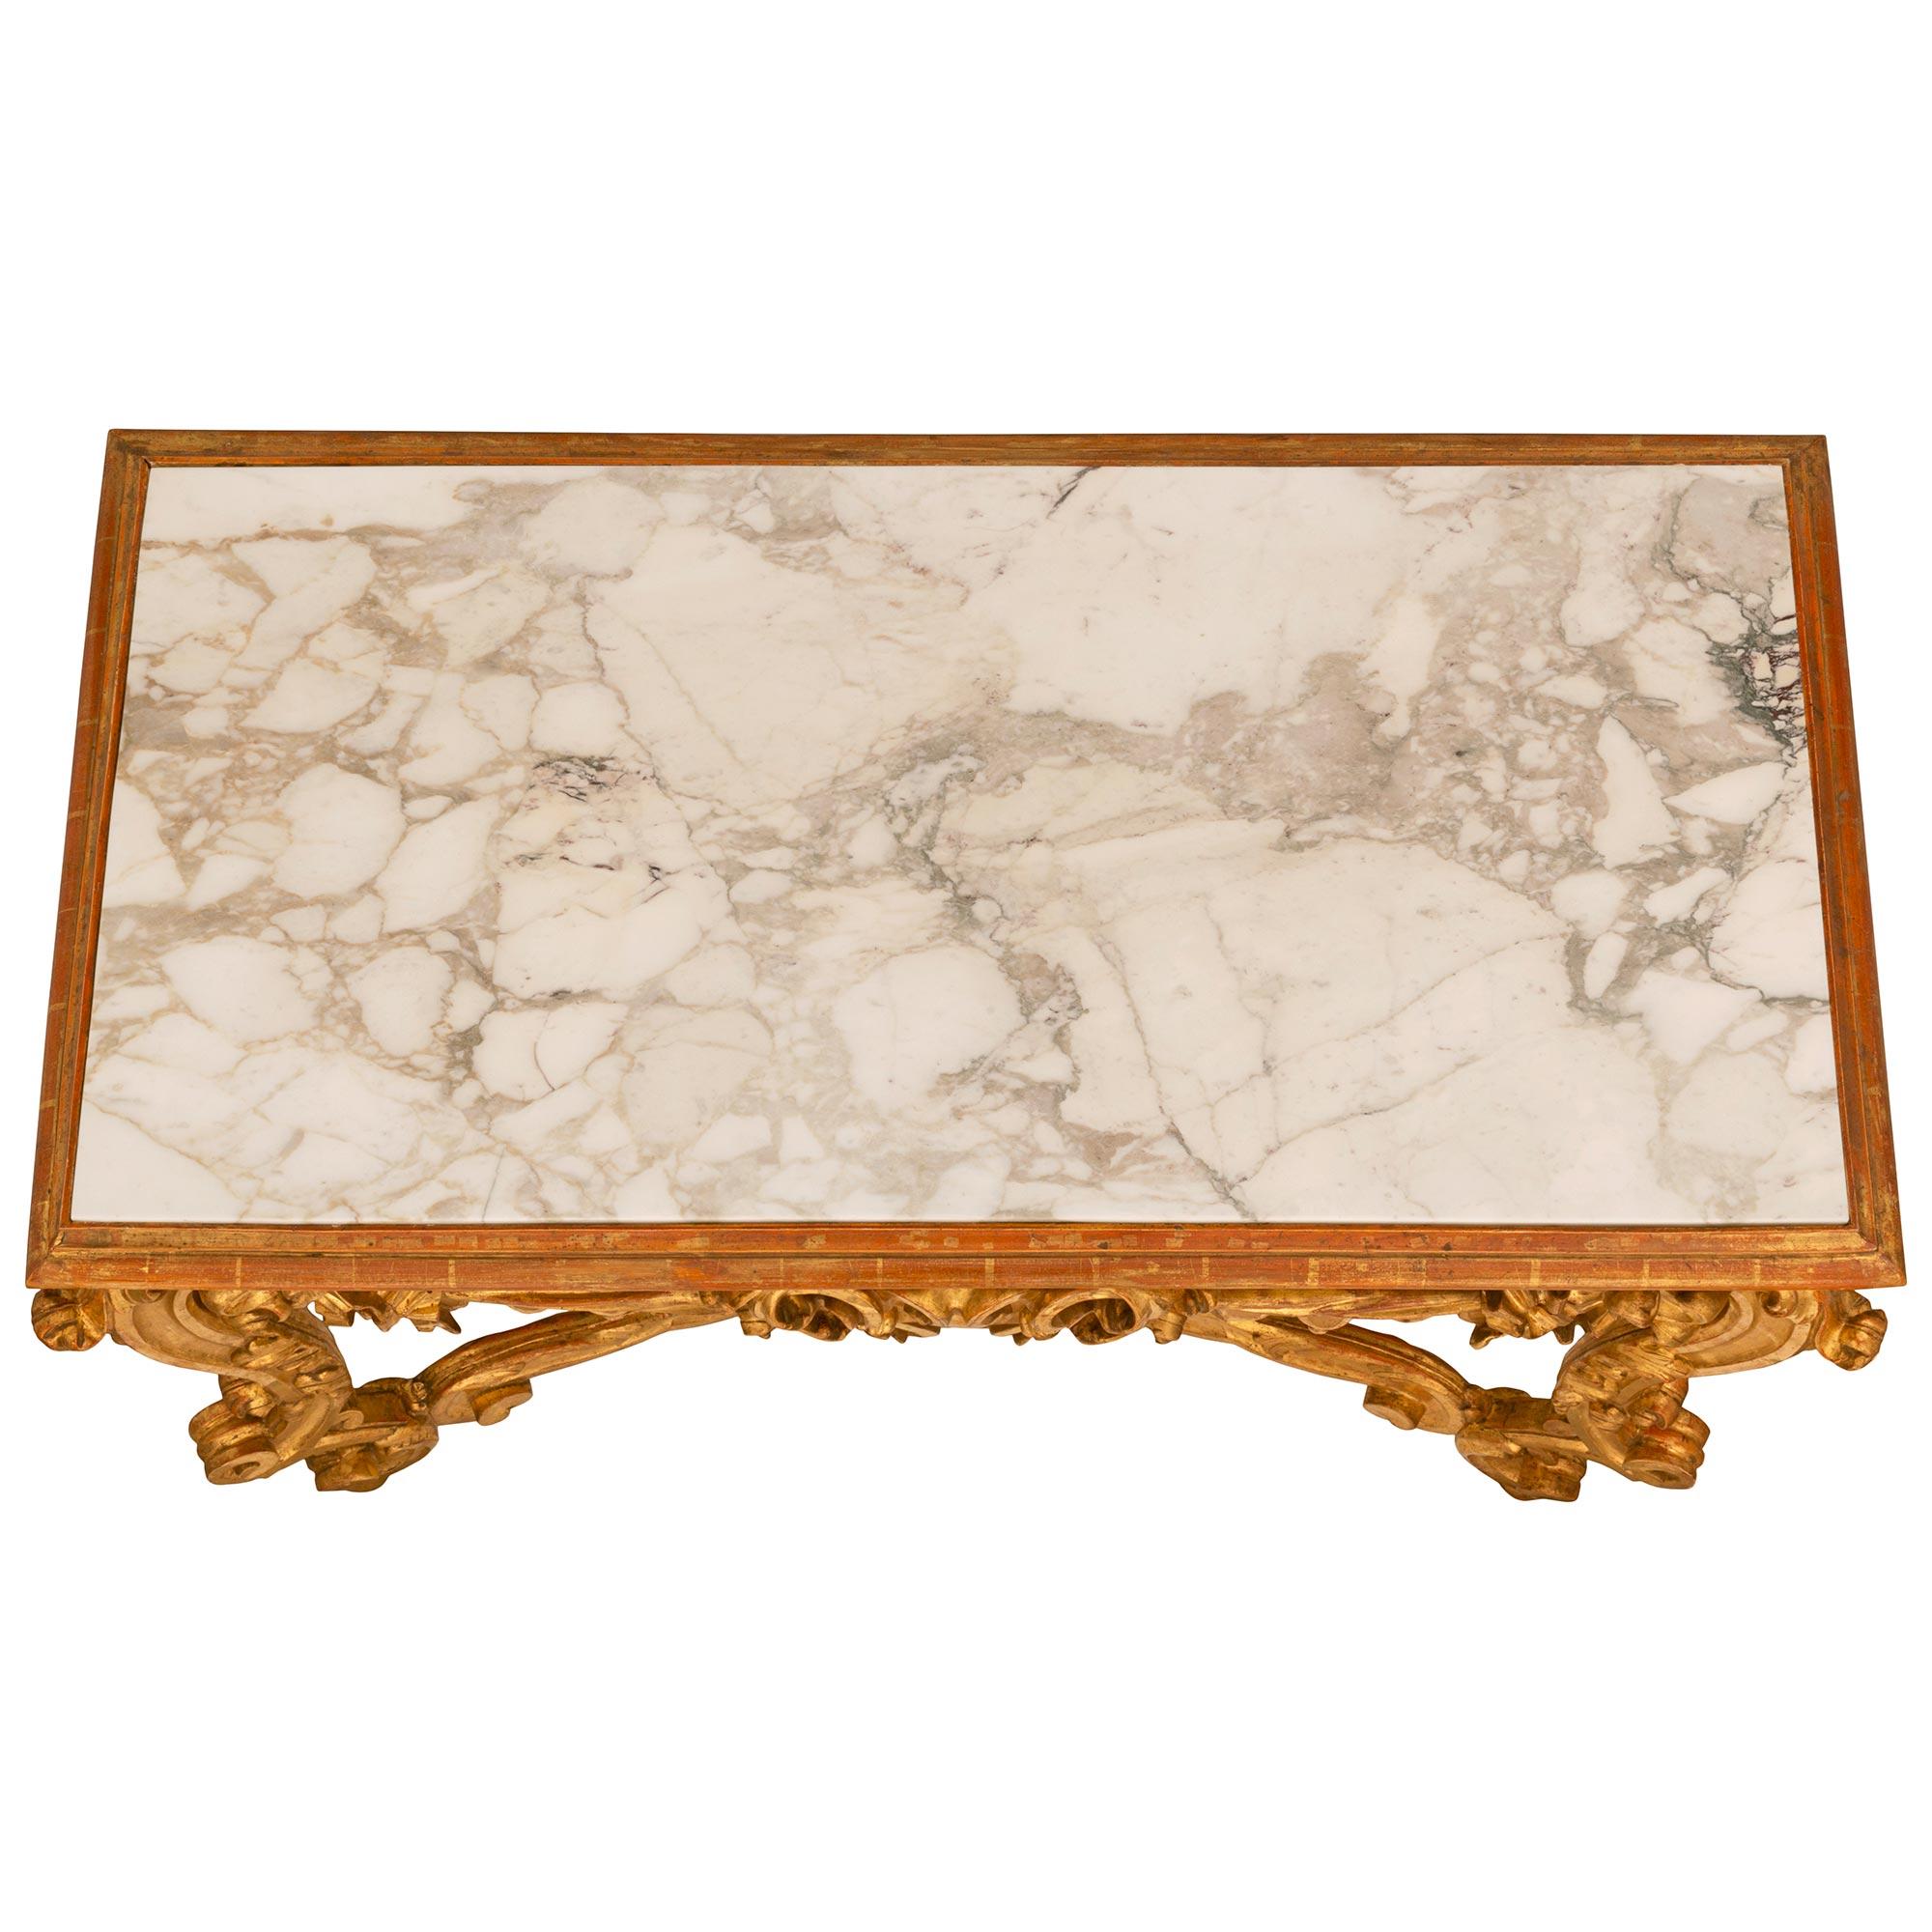 An impressive and large scale Italian mid 19th century Venetian giltwood and marble freestanding console. The console is raised by wonderful and richly carved scrolled legs with a recessed design and adorned with large acanthus leaf carvings. The